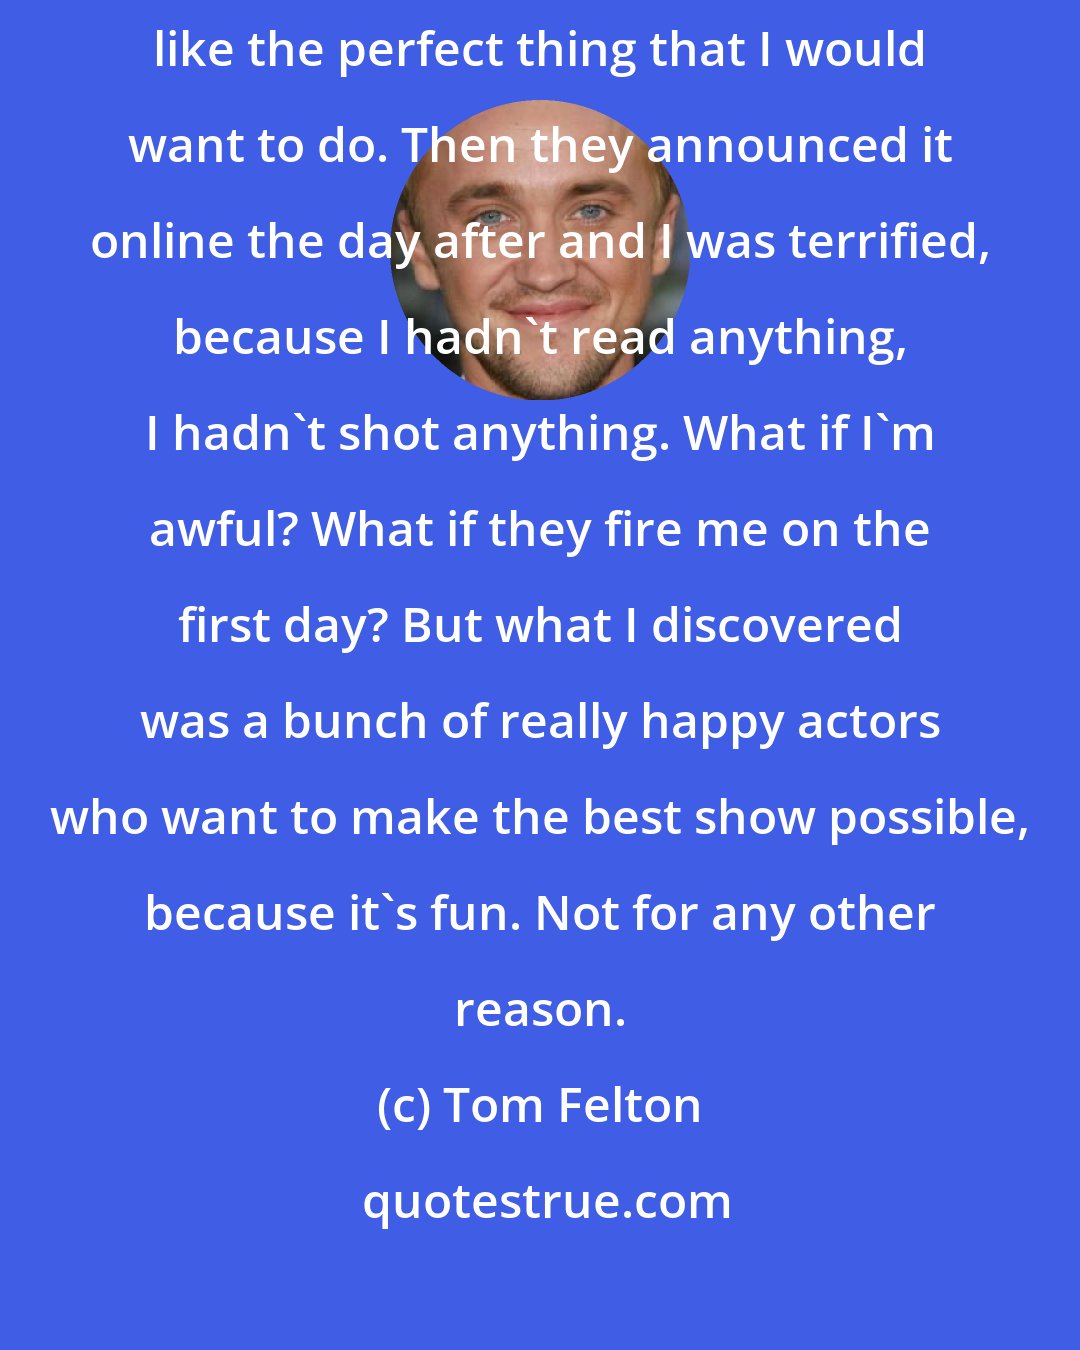 Tom Felton: When it was offered [a role in The Flash] I just thought it sounded like the perfect thing that I would want to do. Then they announced it online the day after and I was terrified, because I hadn't read anything, I hadn't shot anything. What if I'm awful? What if they fire me on the first day? But what I discovered was a bunch of really happy actors who want to make the best show possible, because it's fun. Not for any other reason.